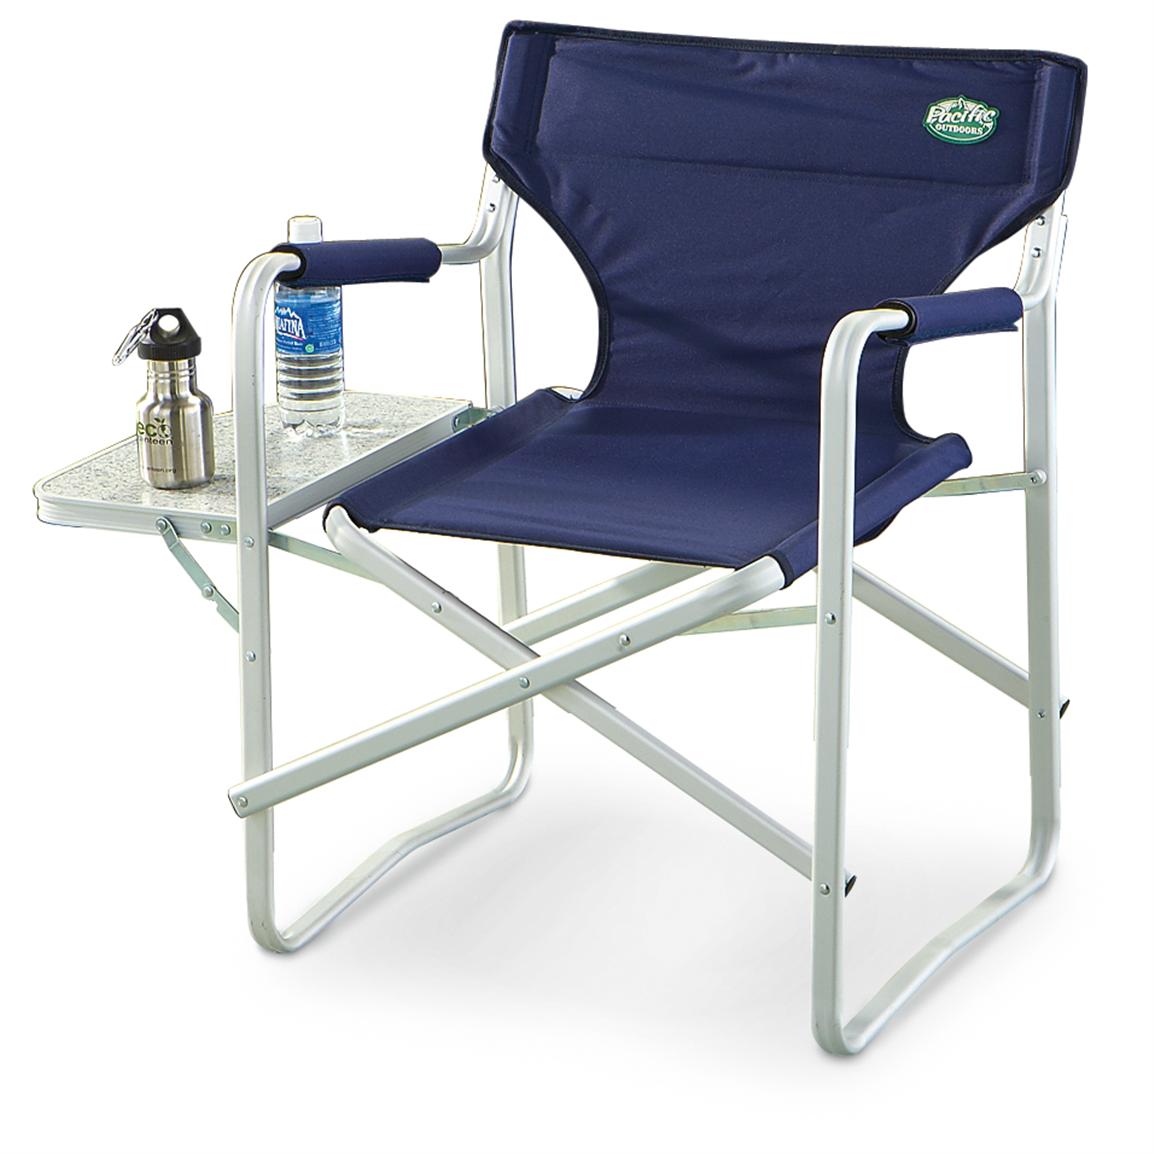 Deluxe Aluminum Camp Chair - 184878, Camping Chairs at Sportsman's Guide